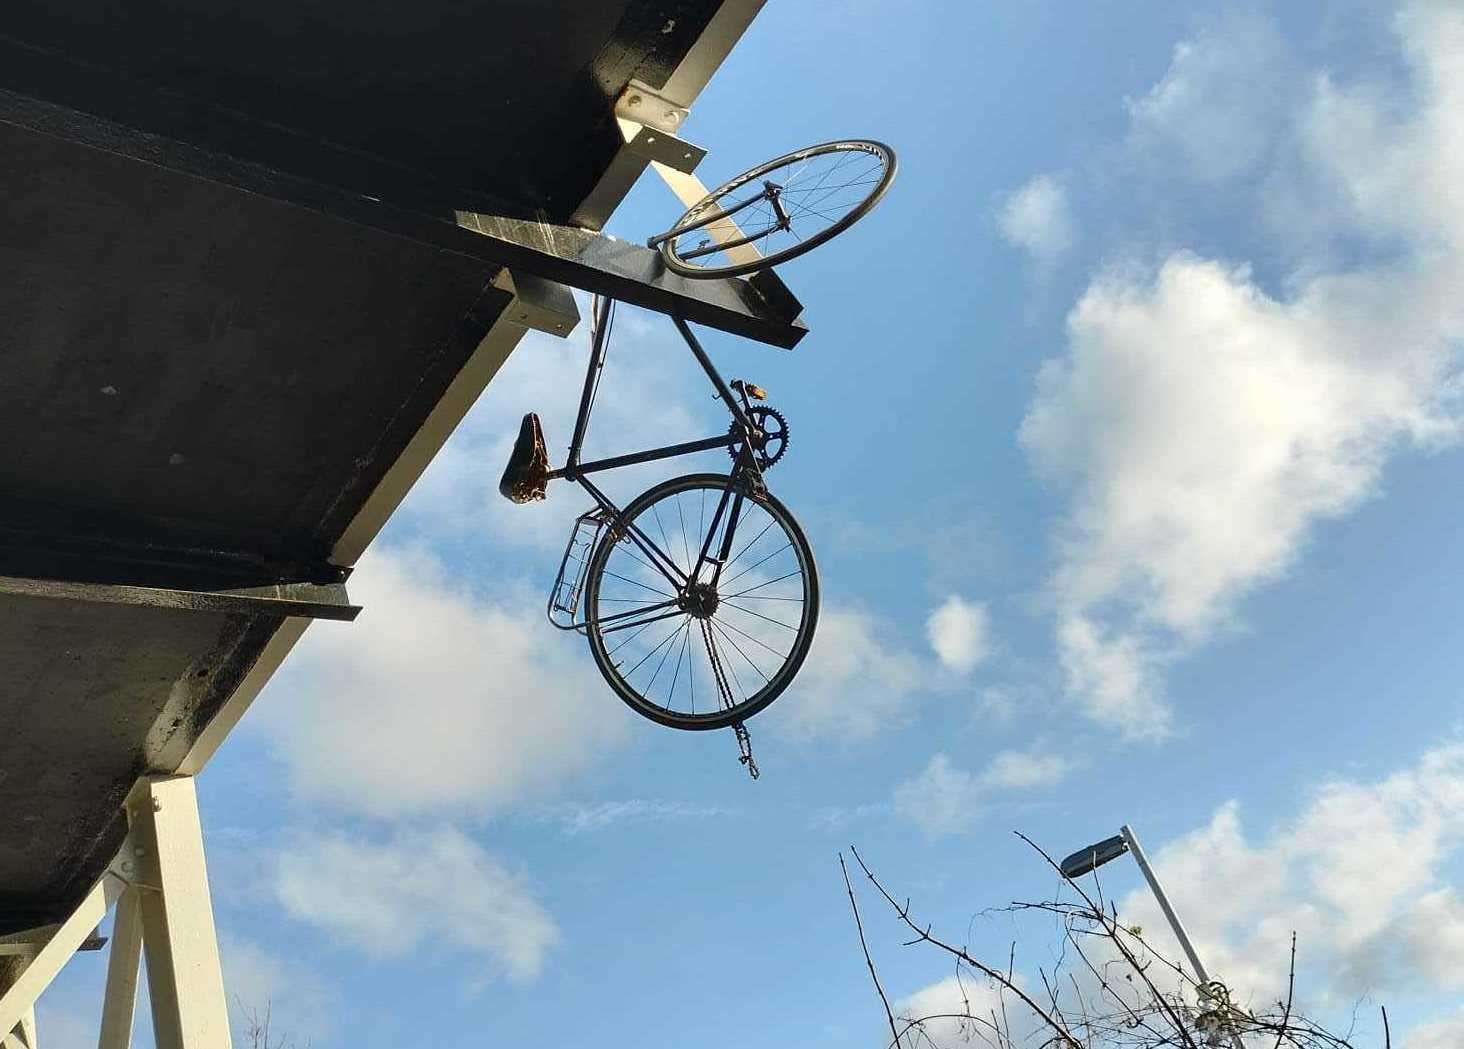 The bike was spotted on the Longfield Railway Station bridge